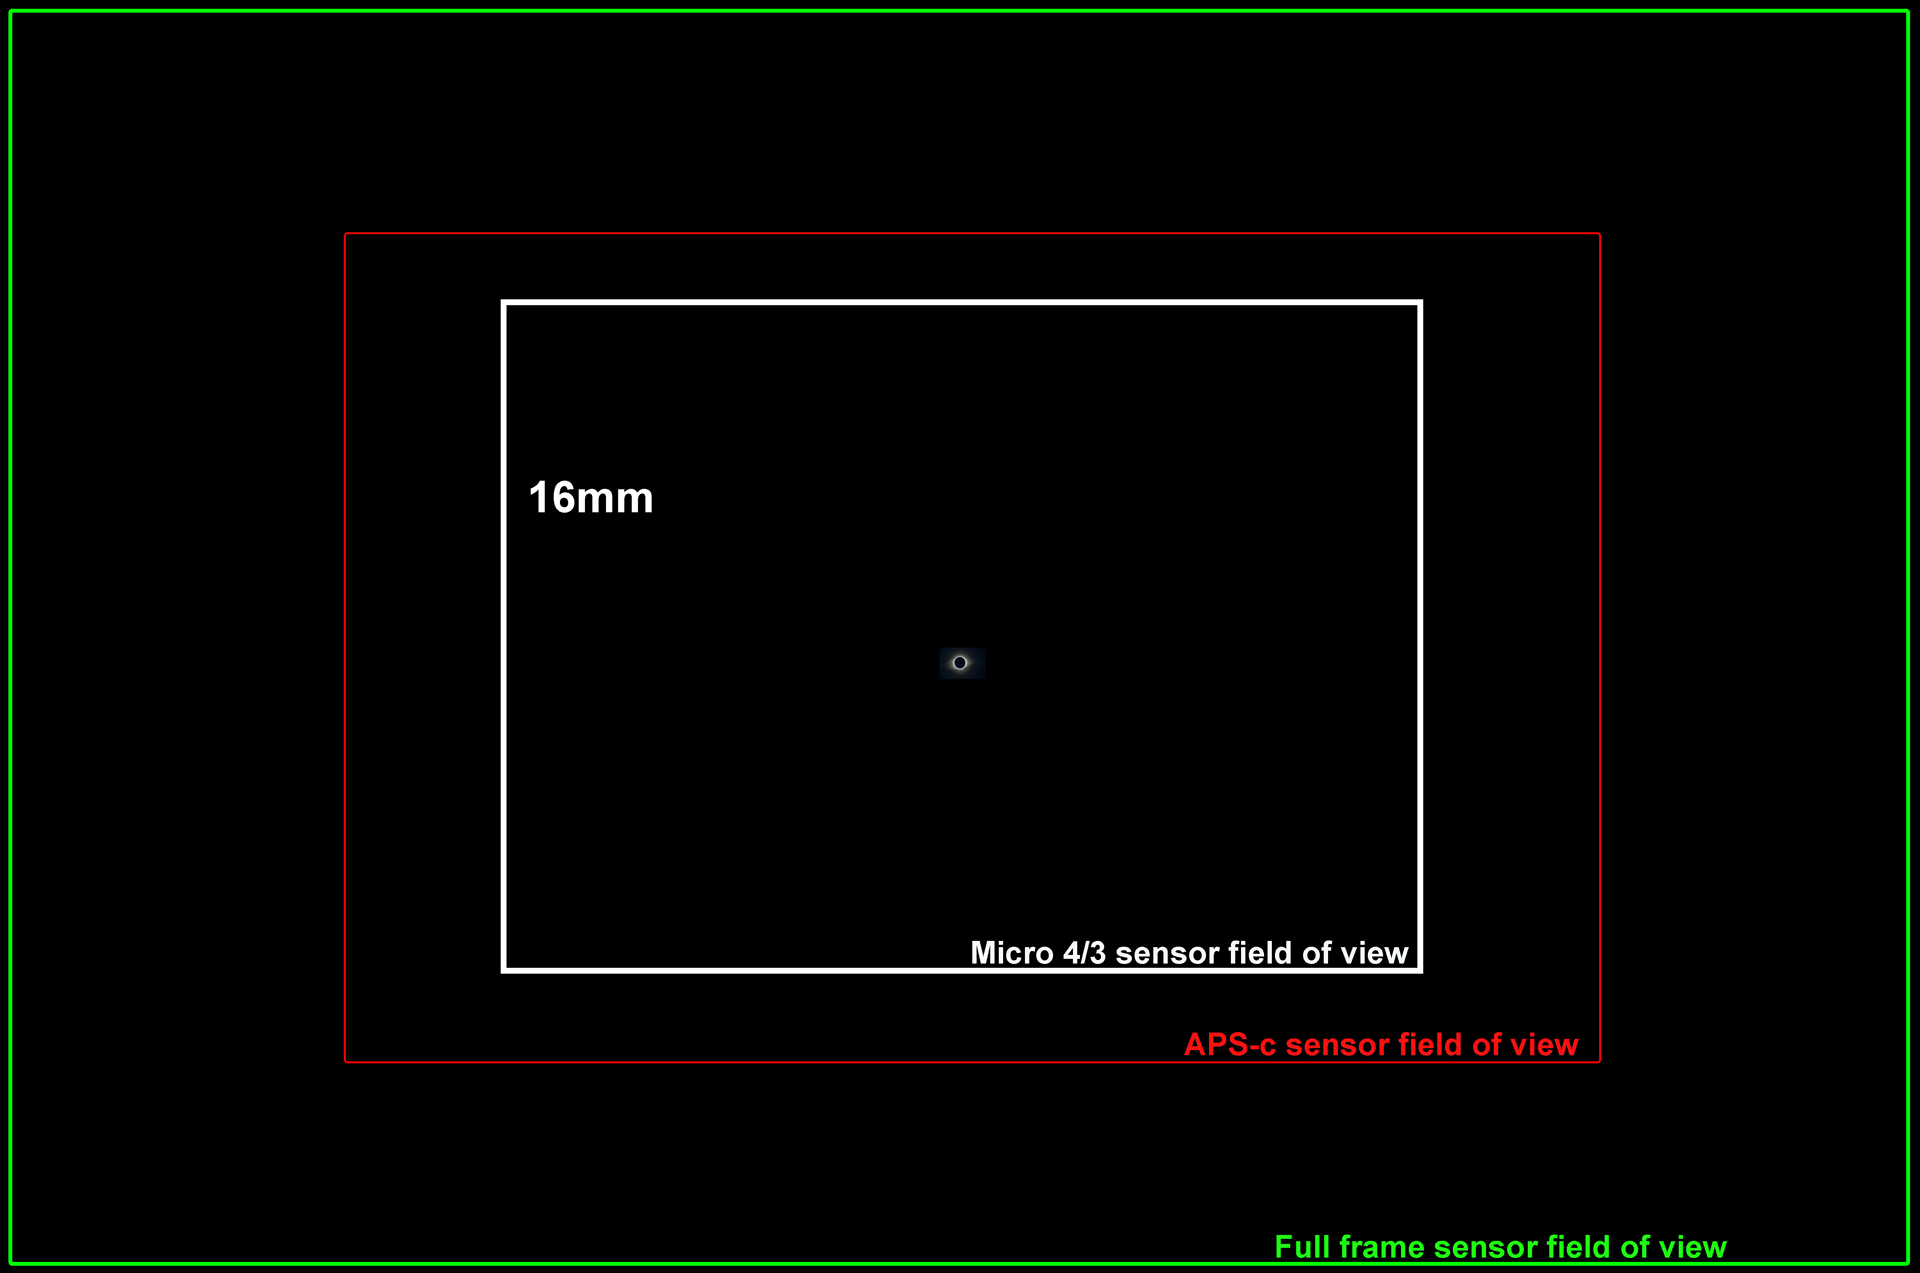 The animation shows the size of the Sun and its atmosphere relative to the field of view of both a full frame sensor and an APS-C sensor as the focal length of the lens is varied.